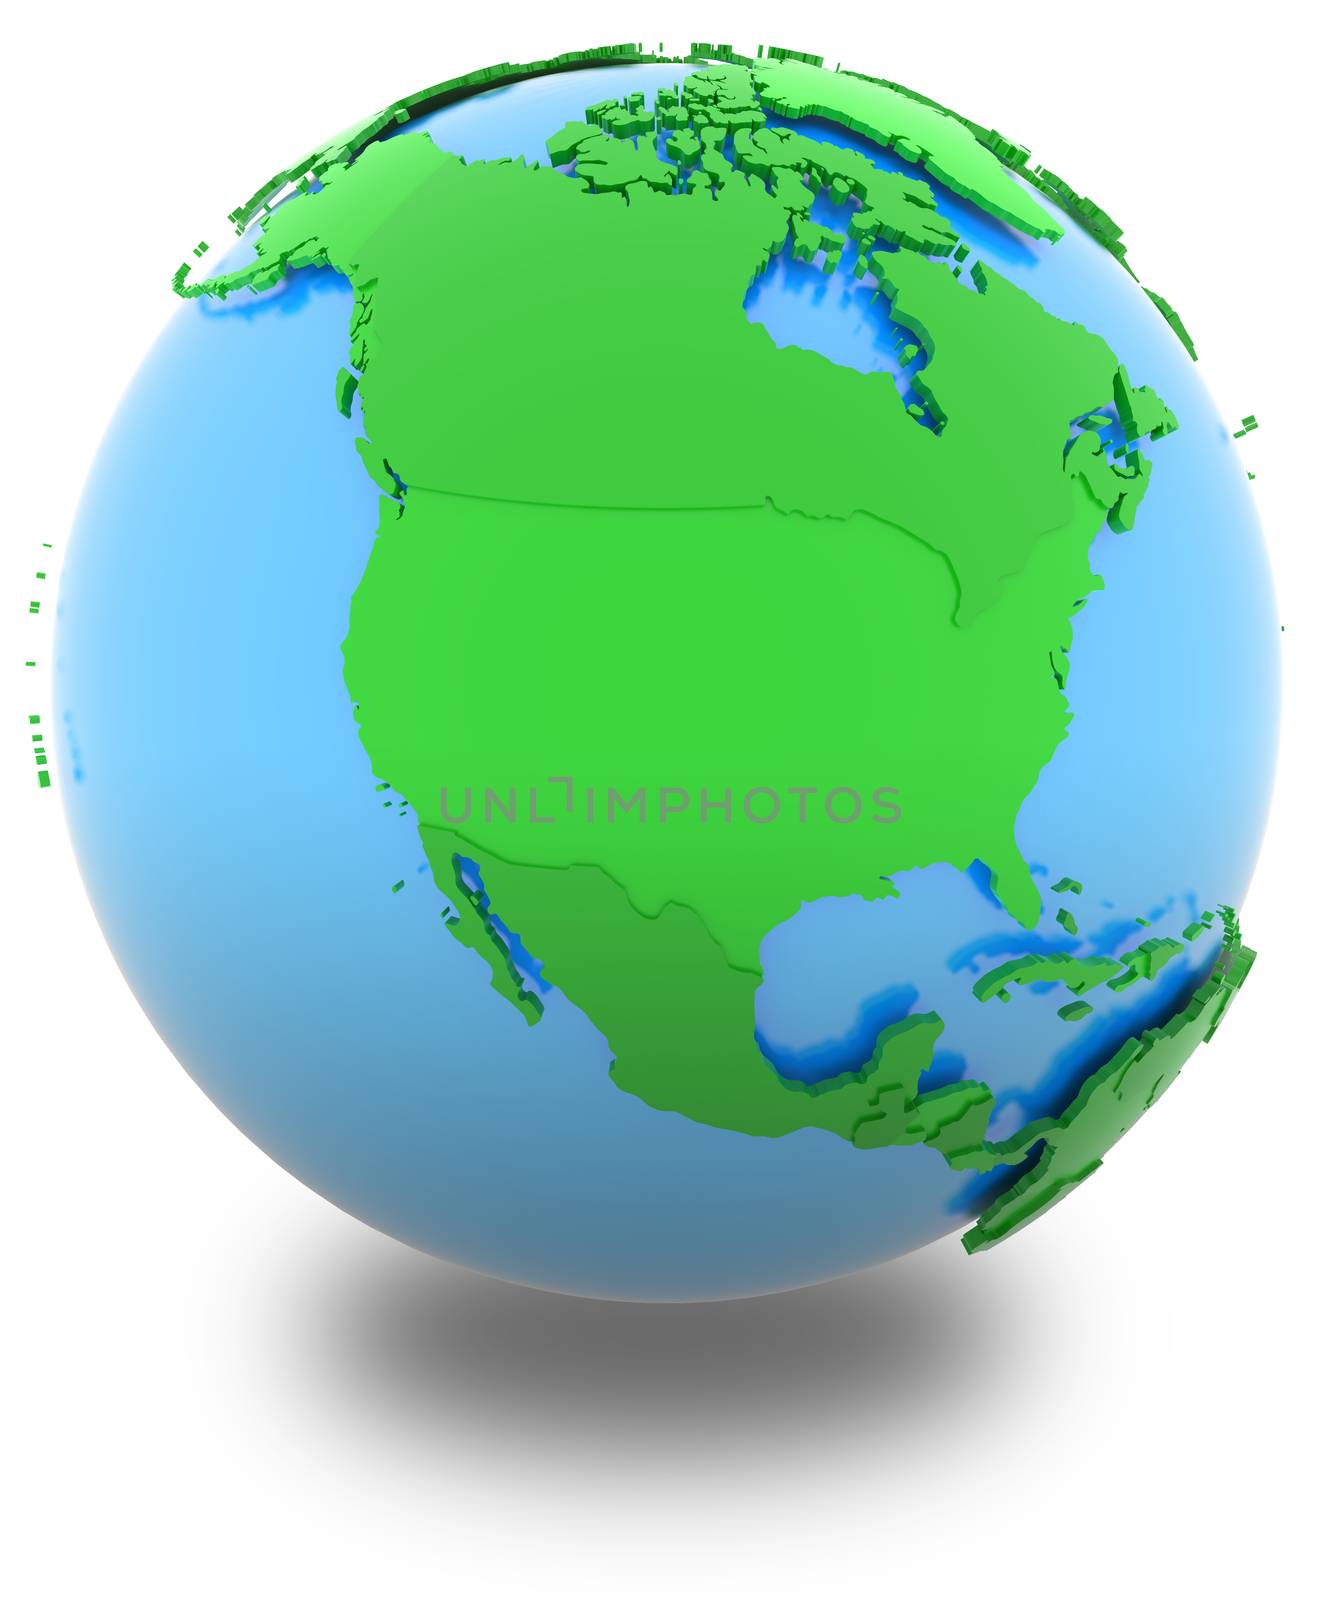 North America on the globe by Harvepino